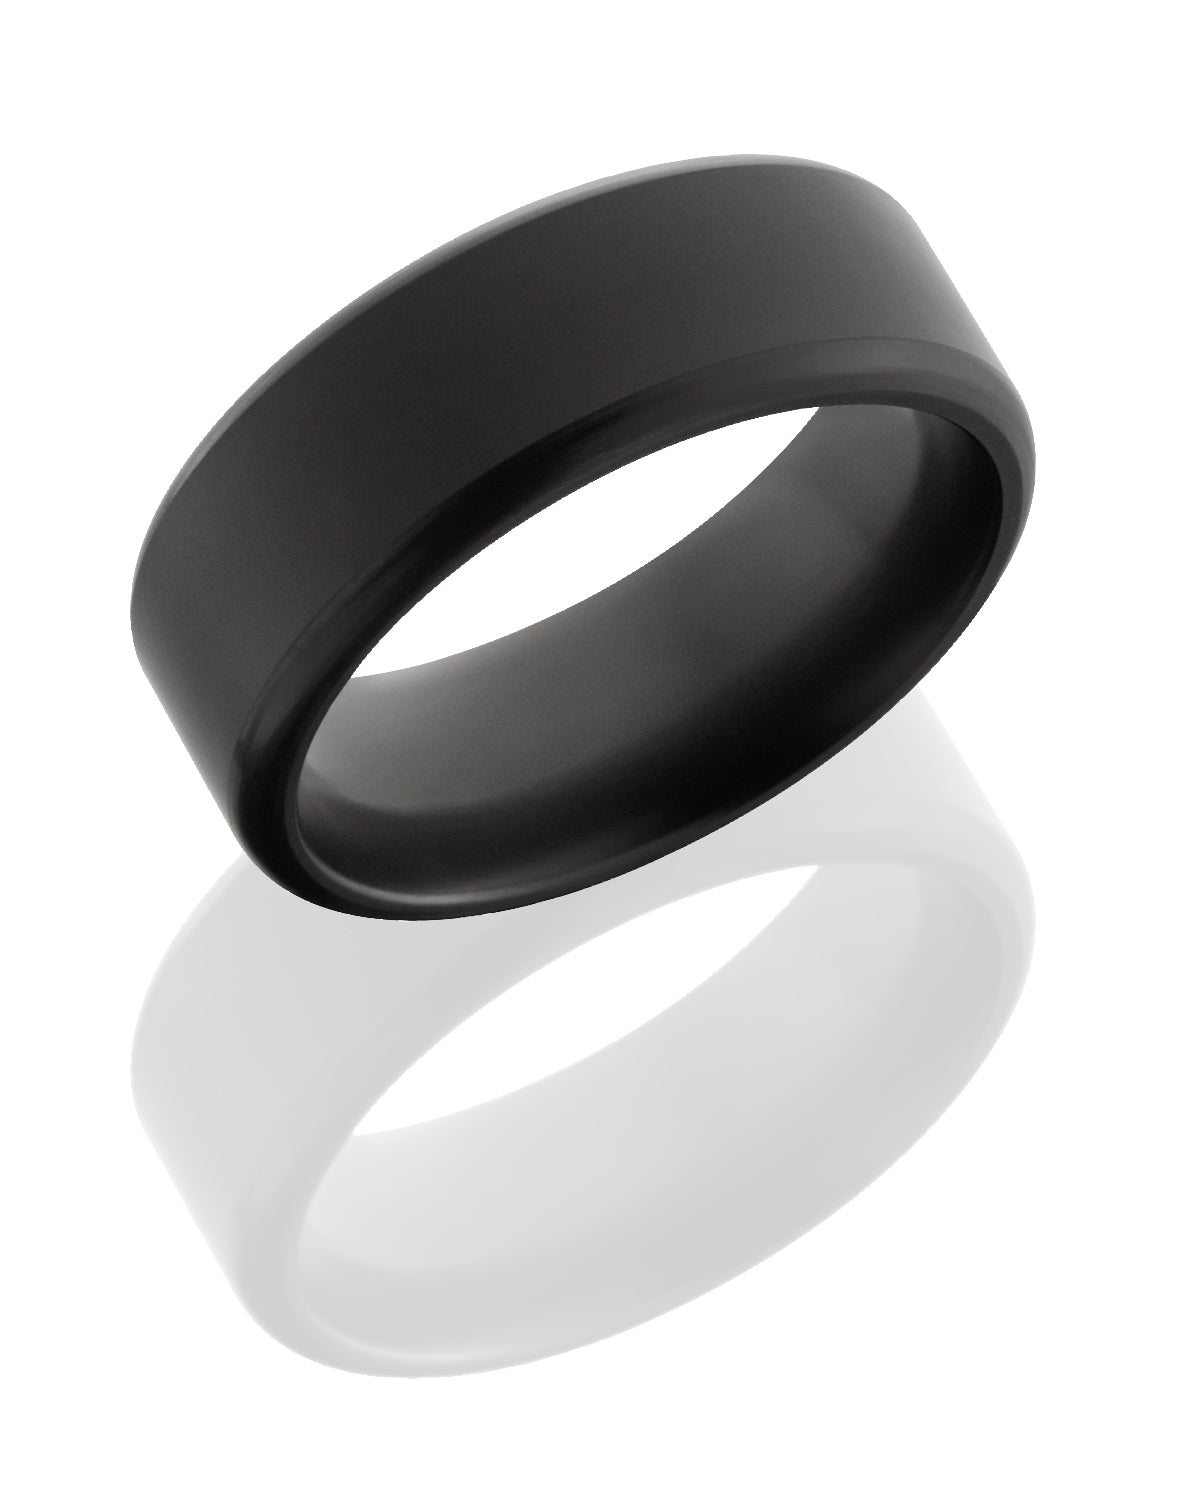 KRATOS ROUNDED MATTE MENS BAND